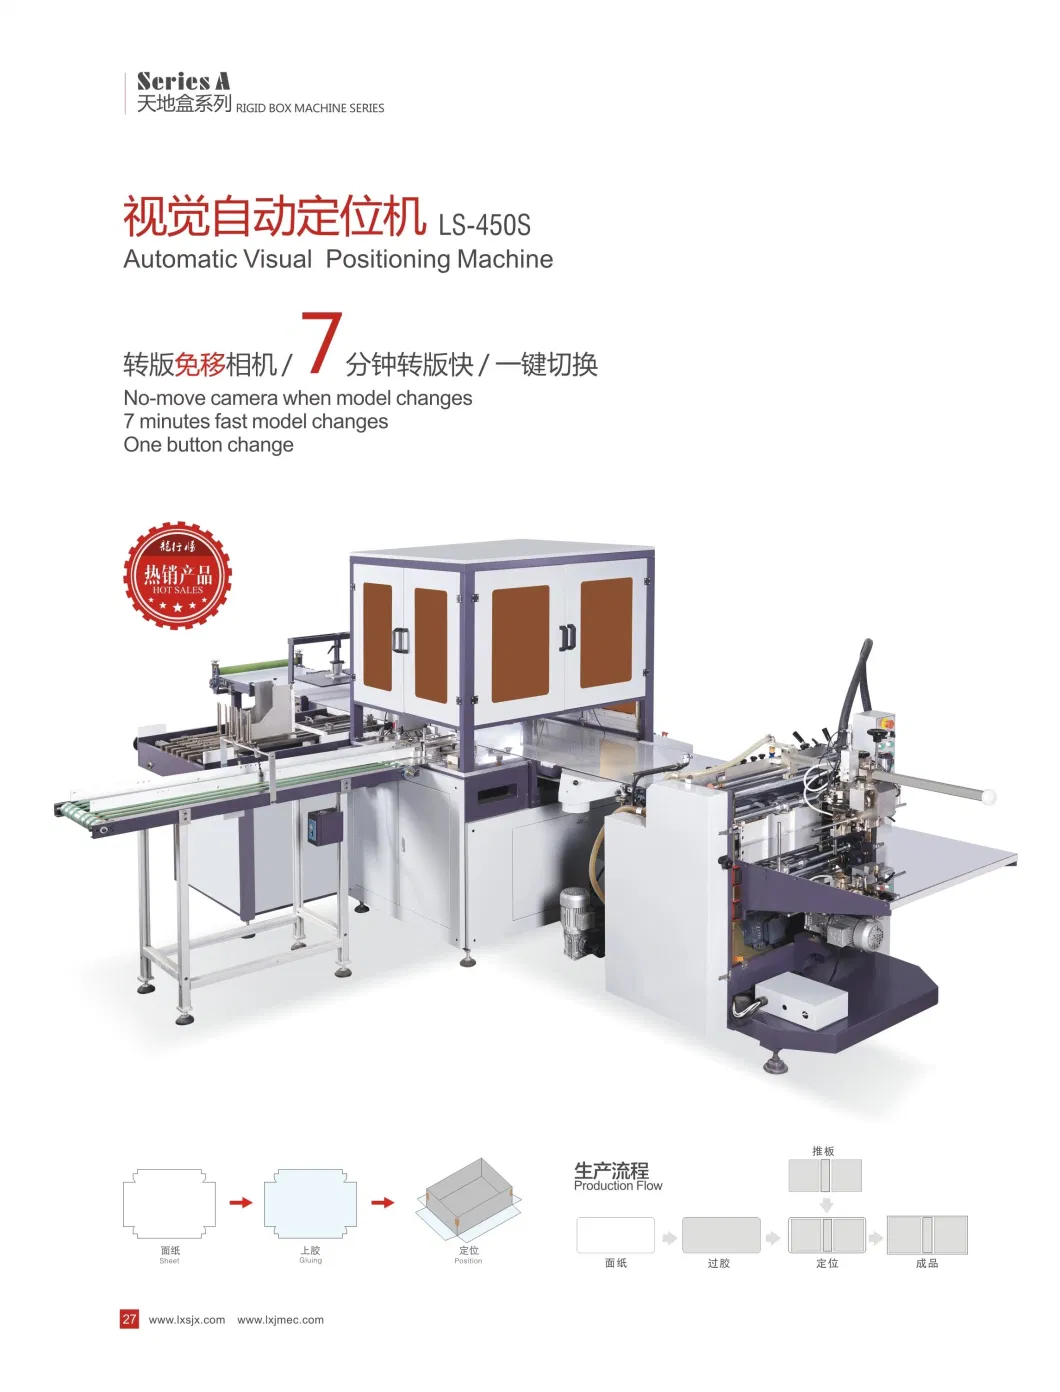 Automatic High Speed Rigid Making Machine 33PCS/Min. Just 7 Min to Mold Change and Easy to Operate.